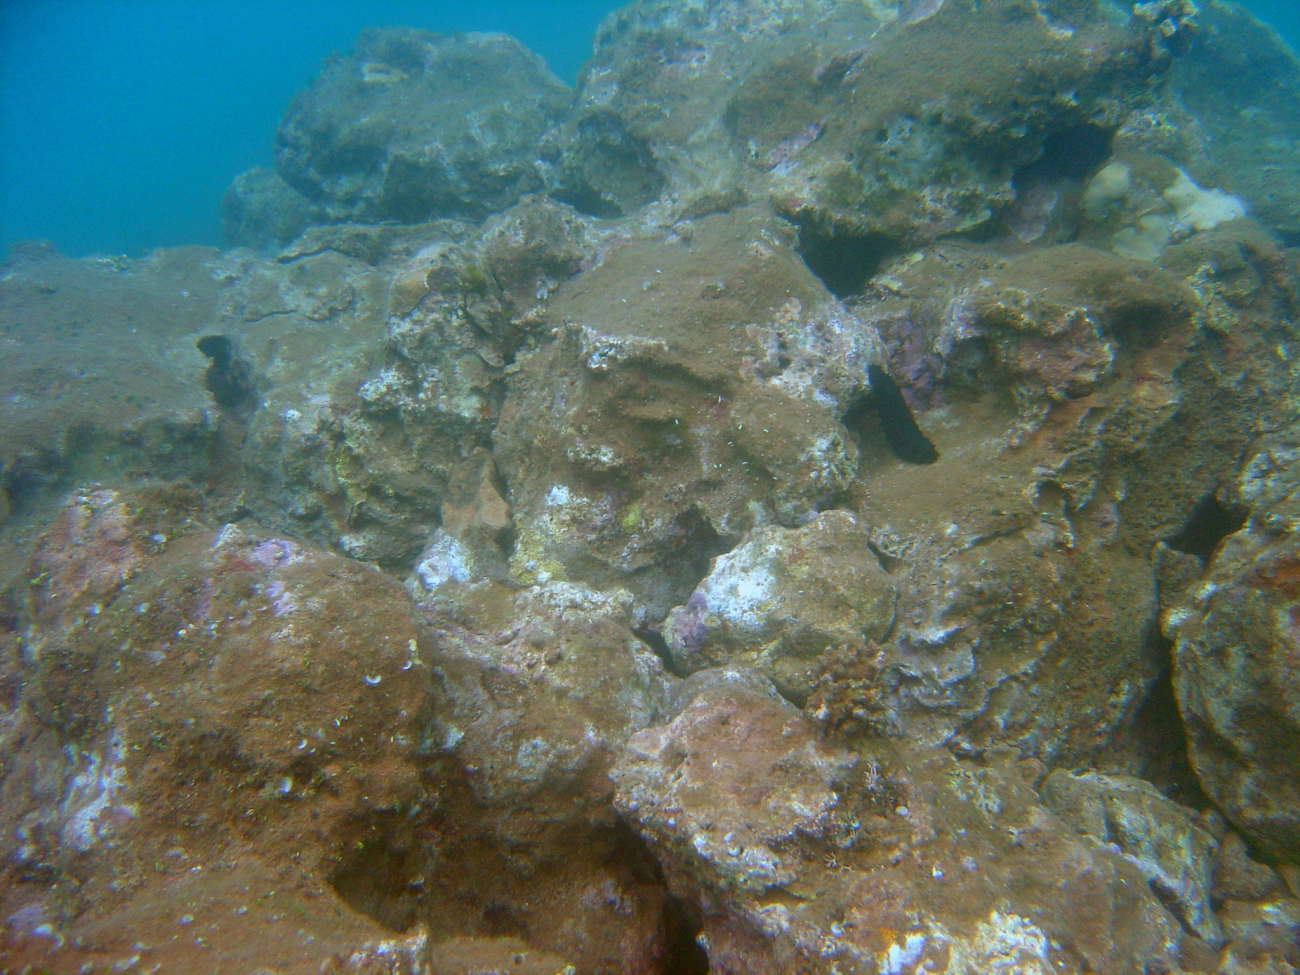 Sediment burying a once-vibrant reef